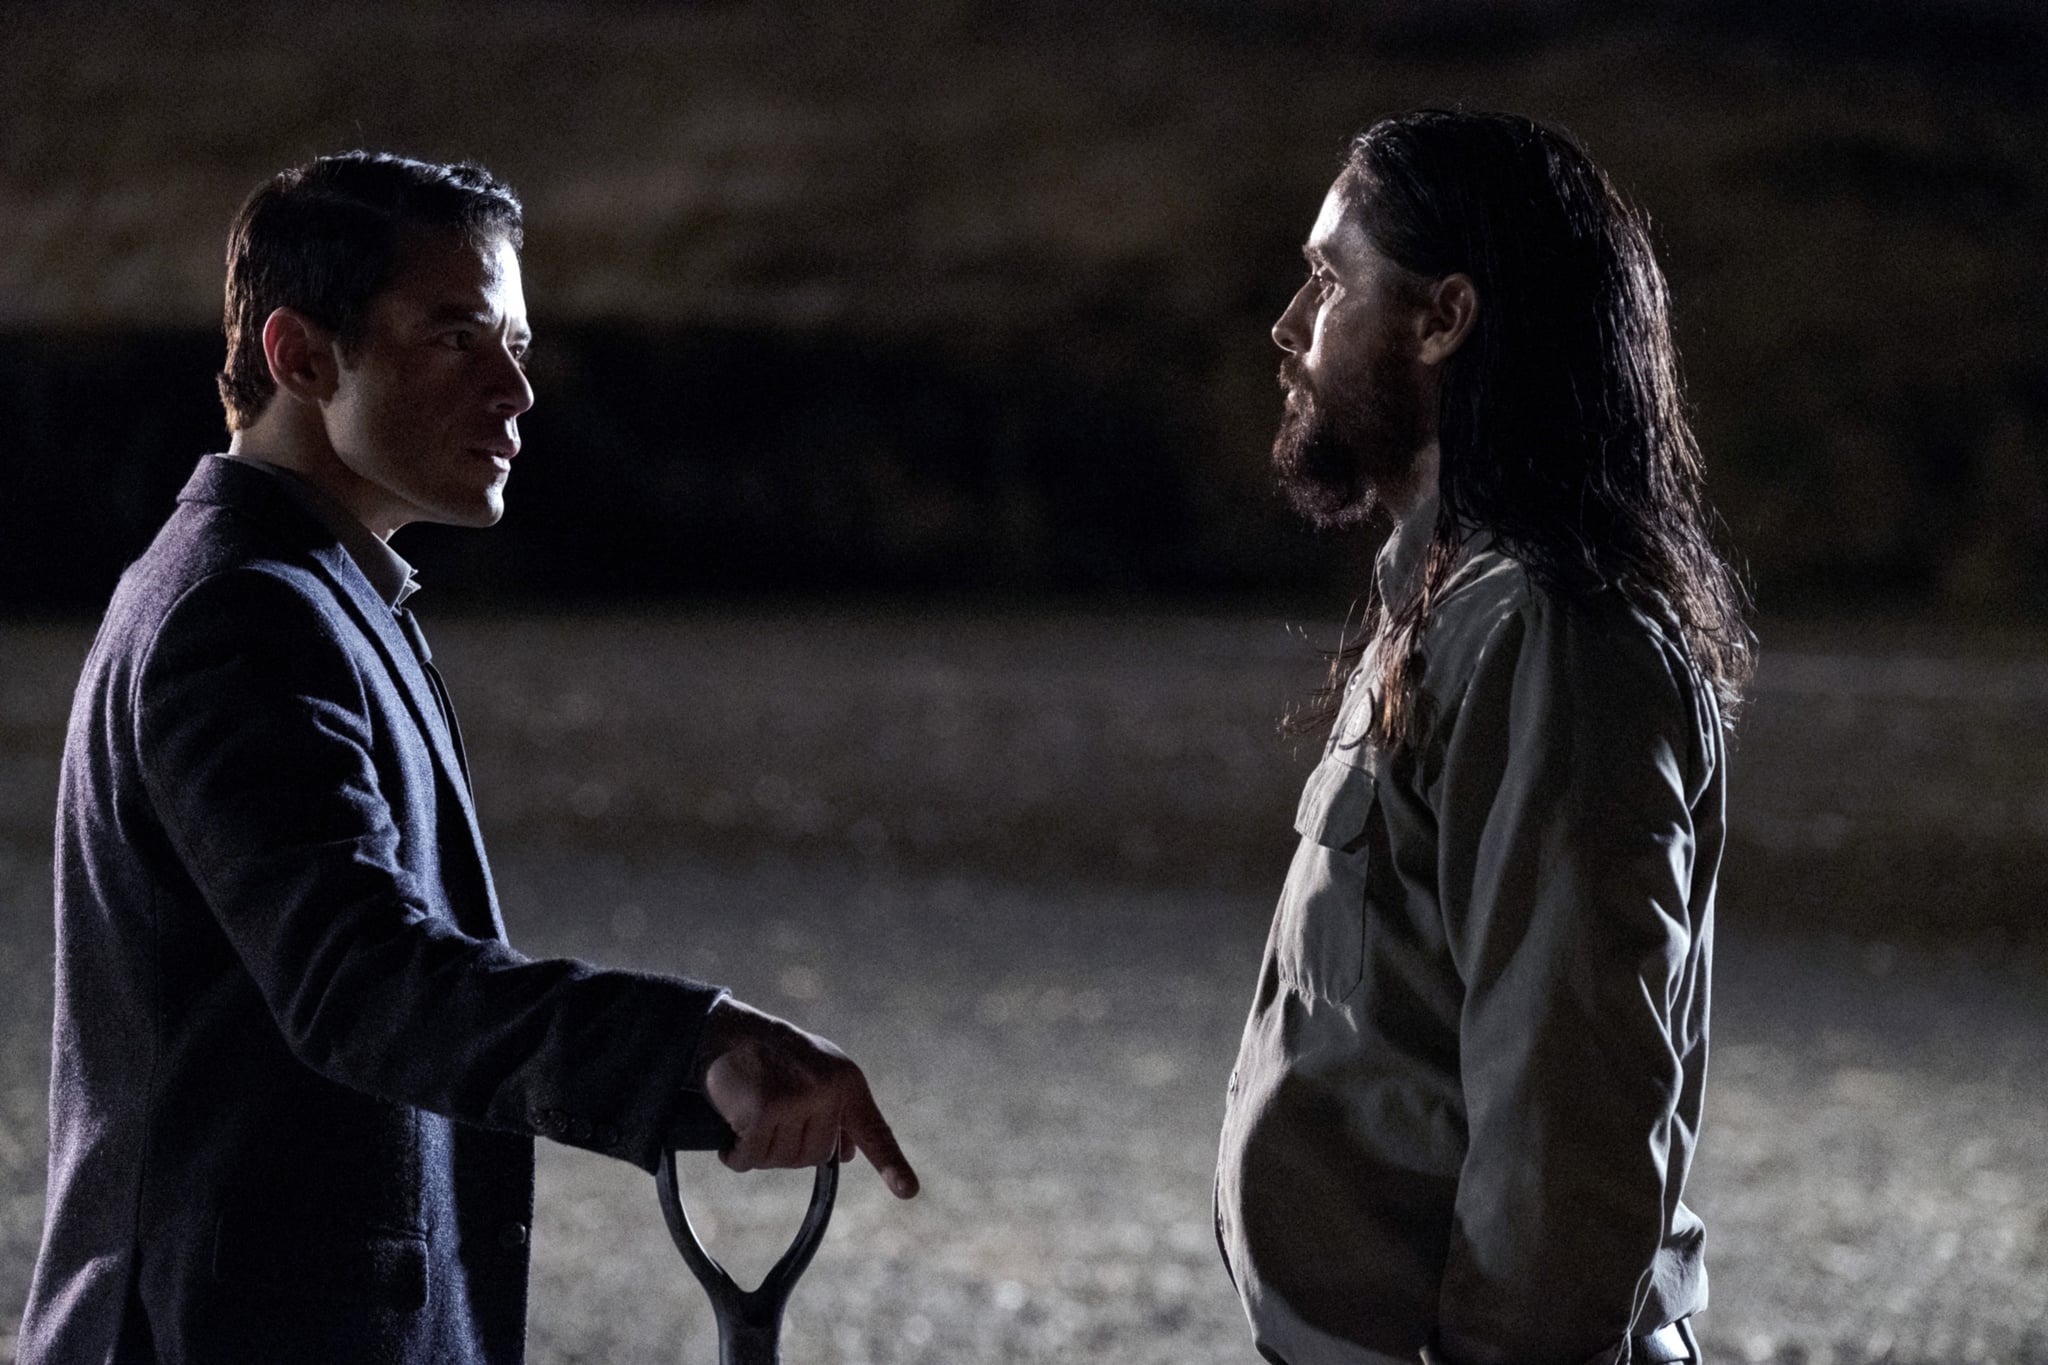 THE LITTLE THINGS, from left: Rami Malek, Jared Leto, 2021. ph: Nicola Goode /  Warner Bros. / Courtesy Everett Collection